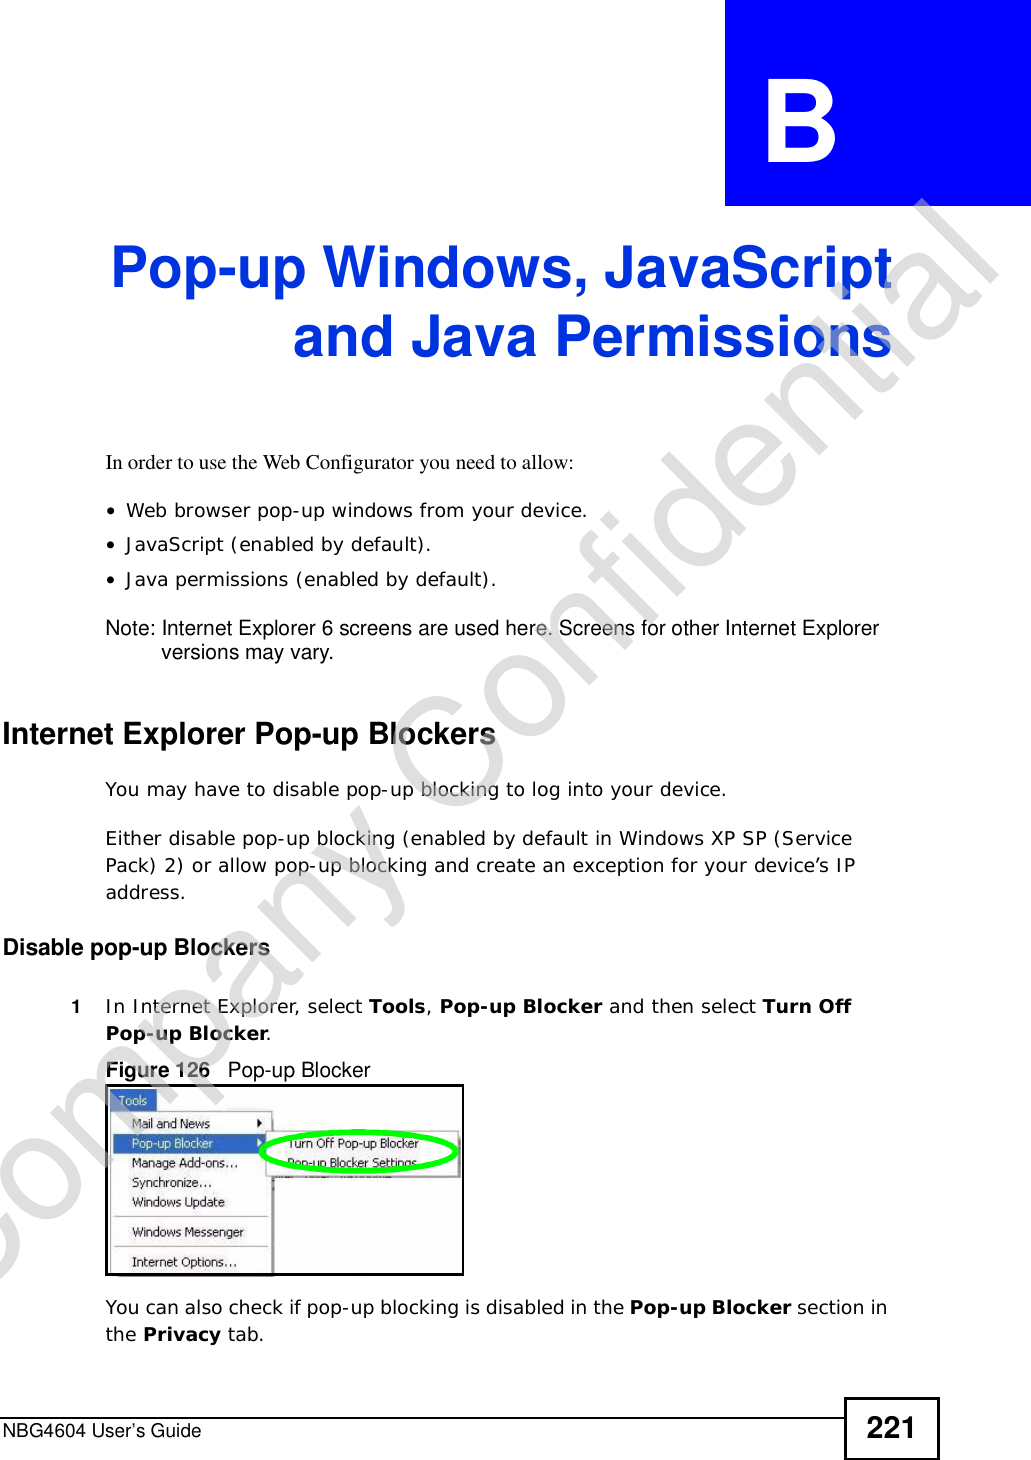 NBG4604 User’s Guide 221APPENDIX  B Pop-up Windows, JavaScriptand Java PermissionsIn order to use the Web Configurator you need to allow:•Web browser pop-up windows from your device.•JavaScript (enabled by default).•Java permissions (enabled by default).Note: Internet Explorer 6 screens are used here. Screens for other Internet Explorer versions may vary.Internet Explorer Pop-up BlockersYou may have to disable pop-up blocking to log into your device. Either disable pop-up blocking (enabled by default in Windows XP SP (Service Pack) 2) or allow pop-up blocking and create an exception for your device’s IP address.Disable pop-up Blockers1In Internet Explorer, select Tools,Pop-up Blocker and then select Turn Off Pop-up Blocker.Figure 126   Pop-up BlockerYou can also check if pop-up blocking is disabled in the Pop-up Blocker section in the Privacy tab. Company Confidential